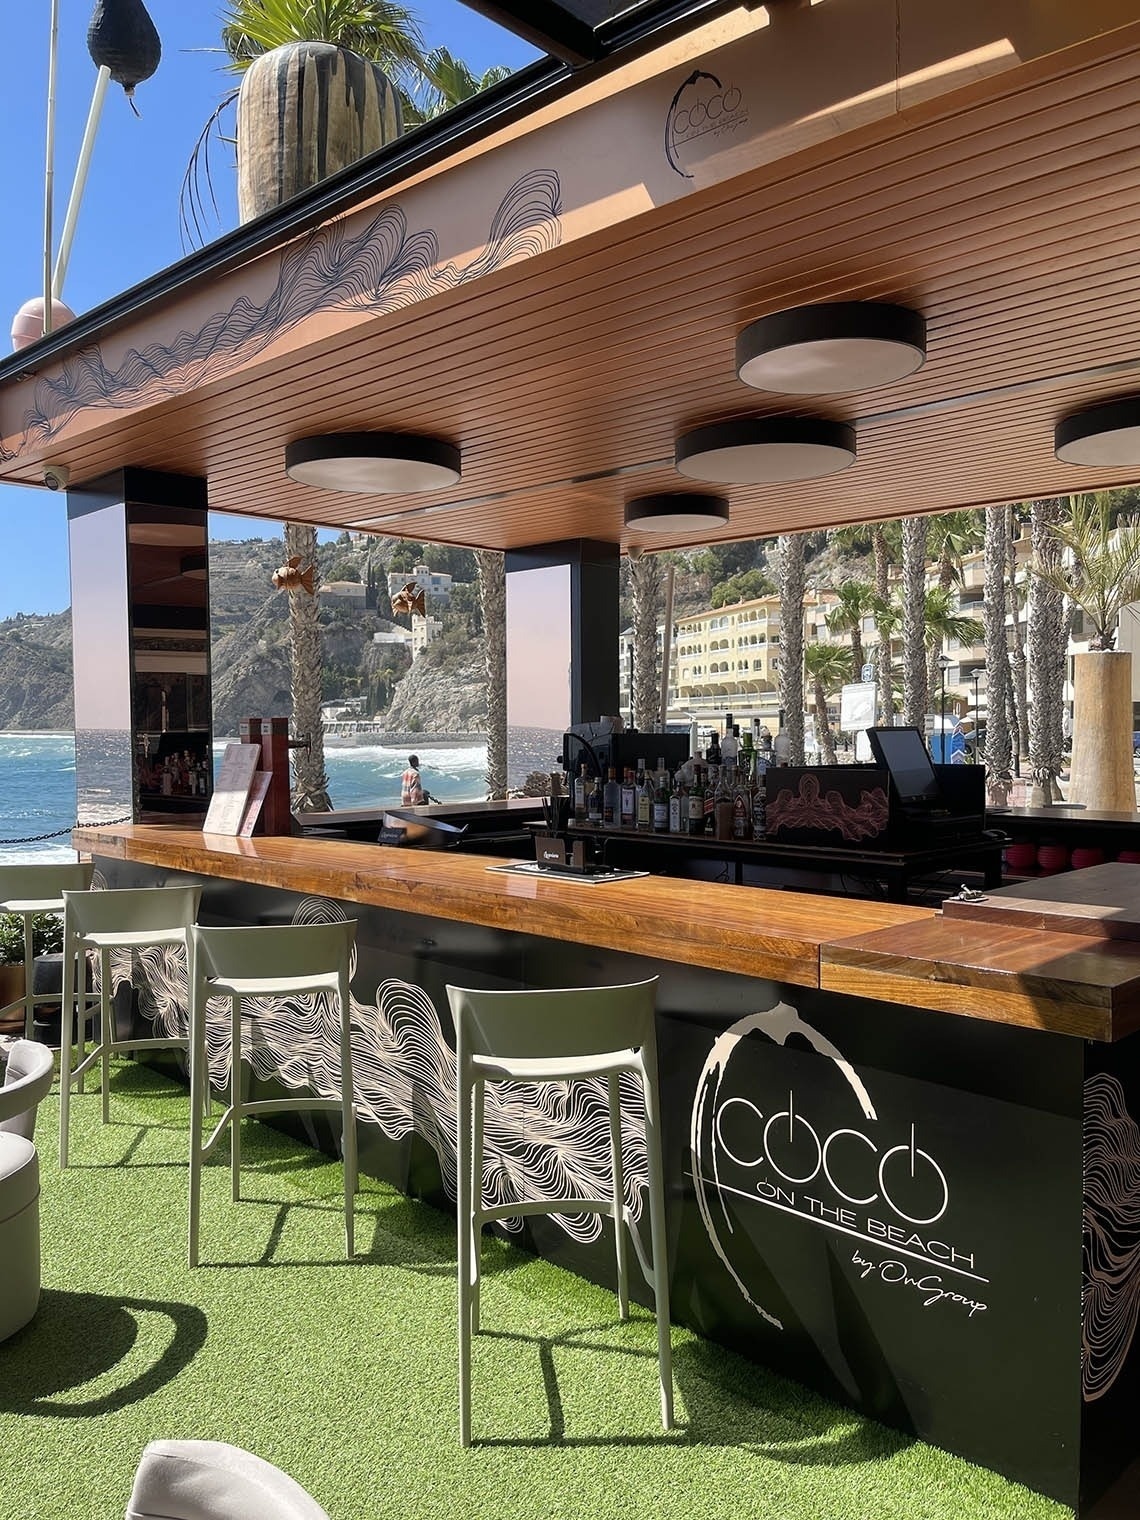 a bar with the word coco on it